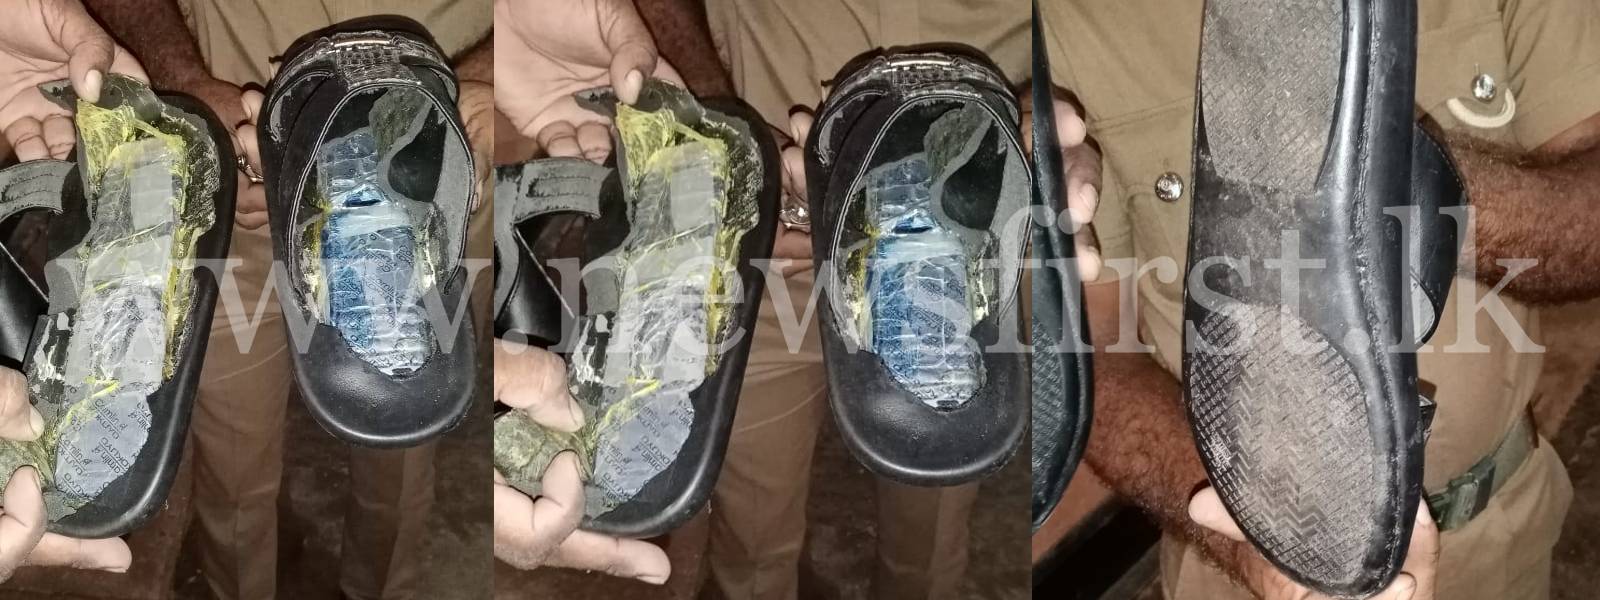 Prisoner attempts to smuggle phones in shoes